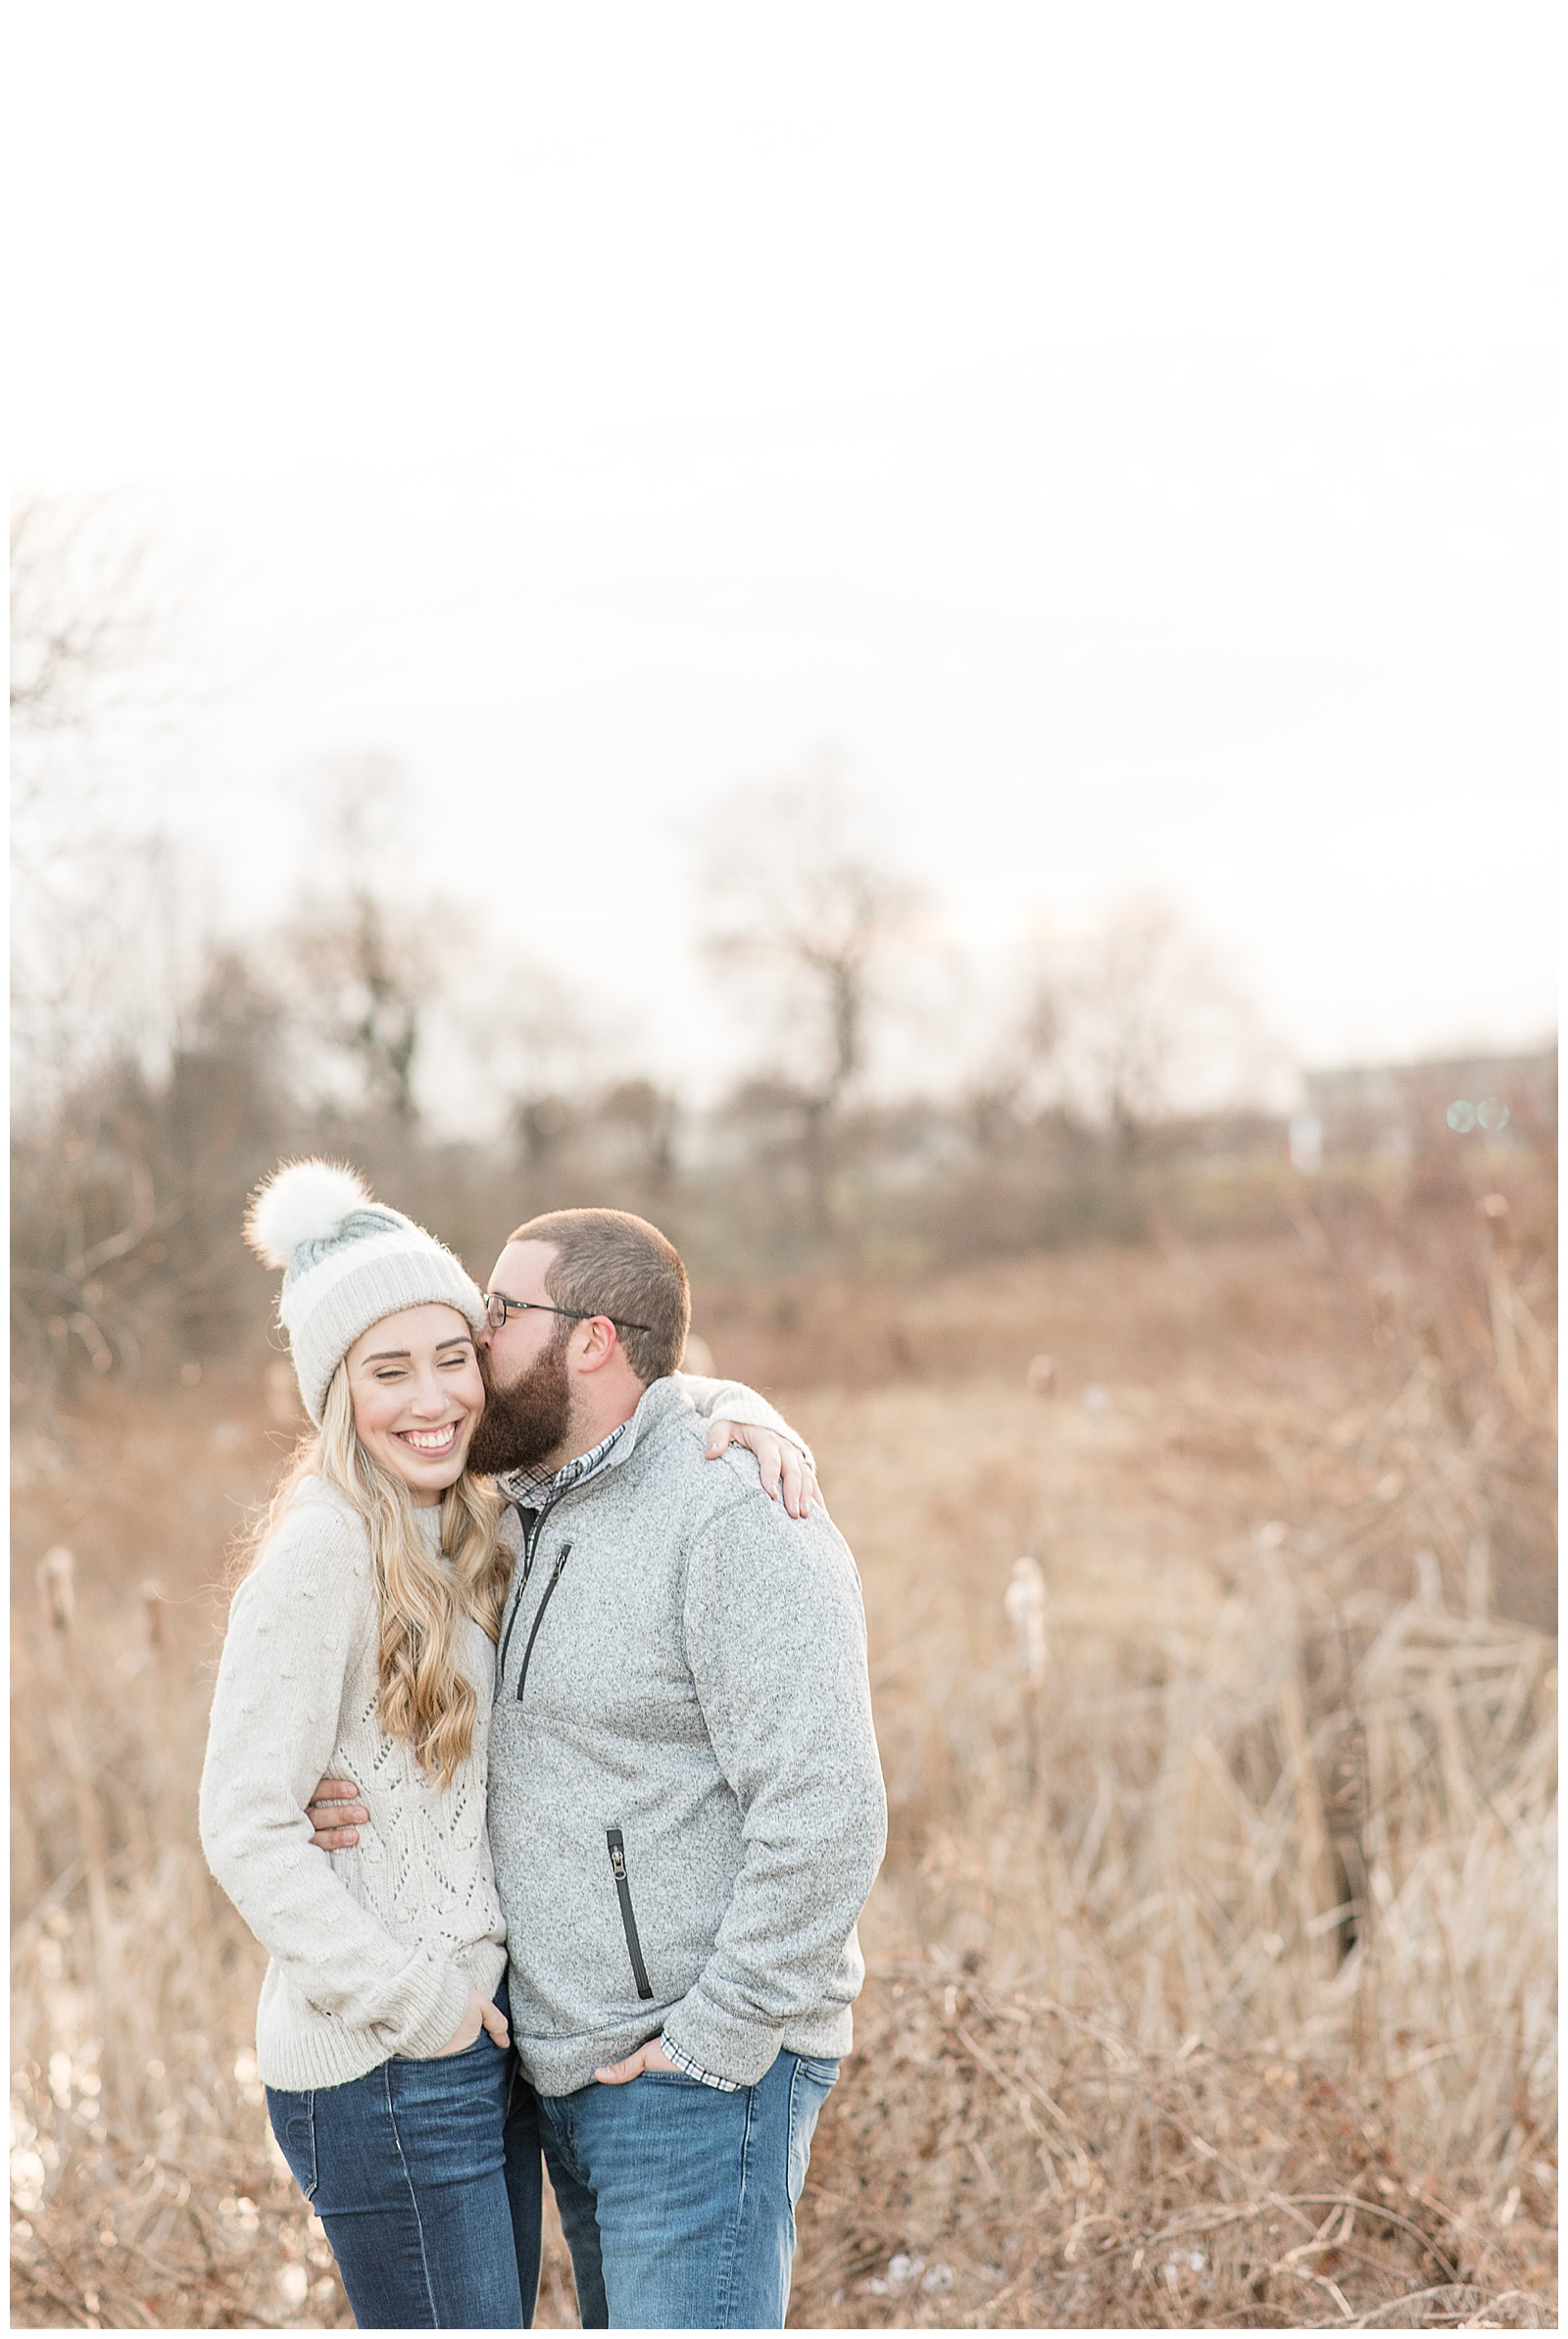 winter engagement session with girl wearing snow hat and guy giving her a kiss on the cheek